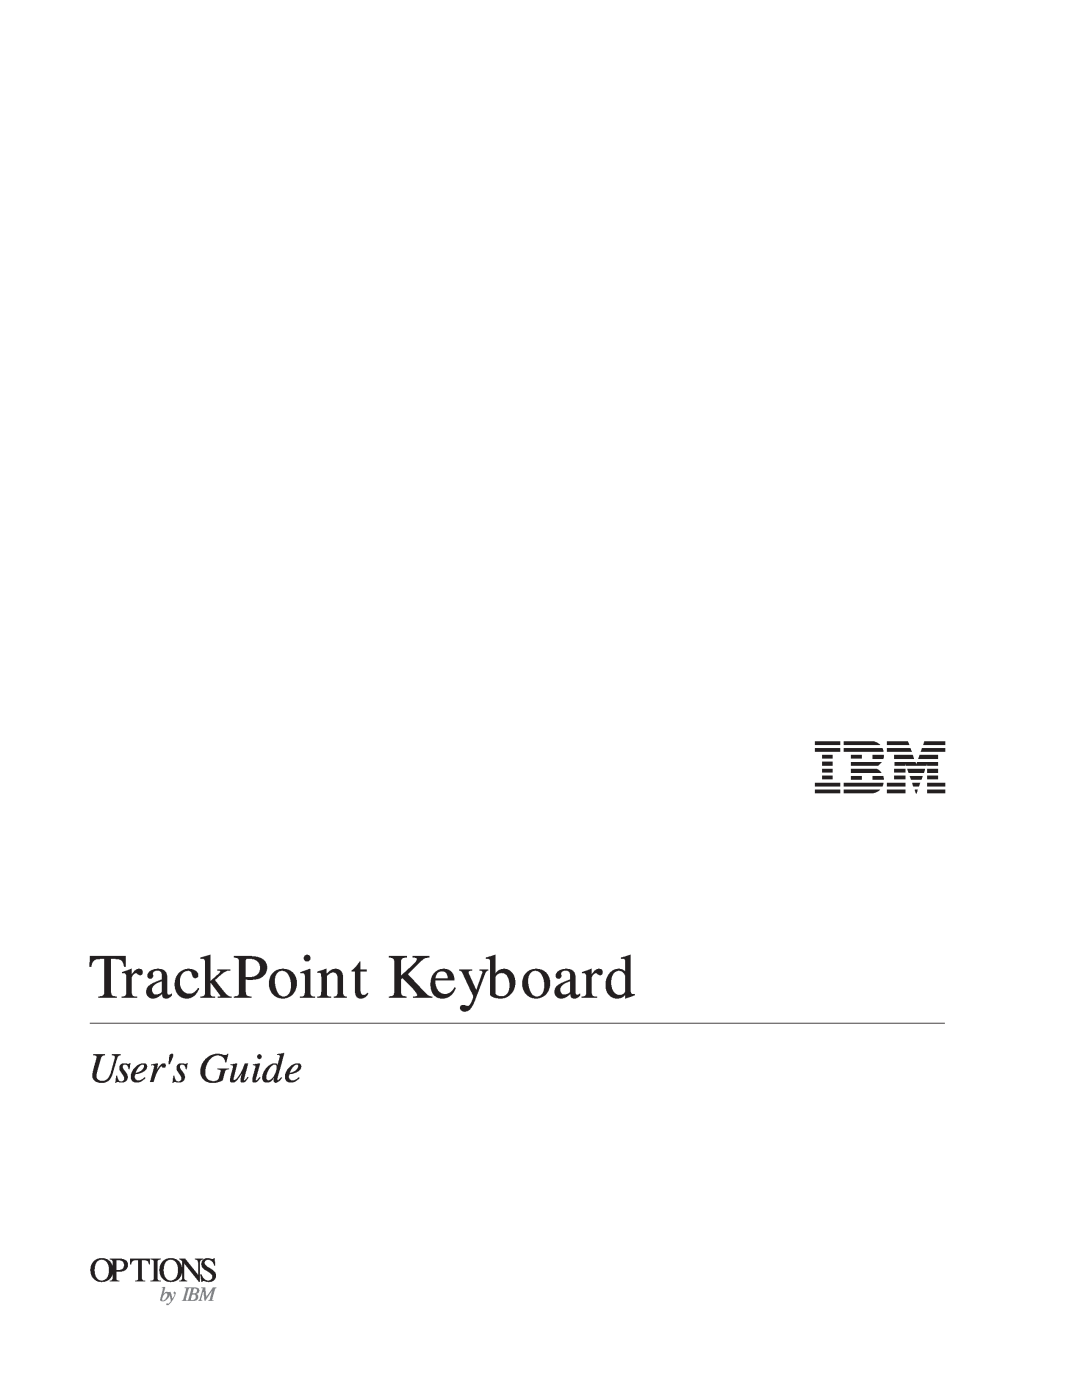 IBM Partner Pavilion manual TrackPoint Keyboard, Users Guide, Options, by IBM 